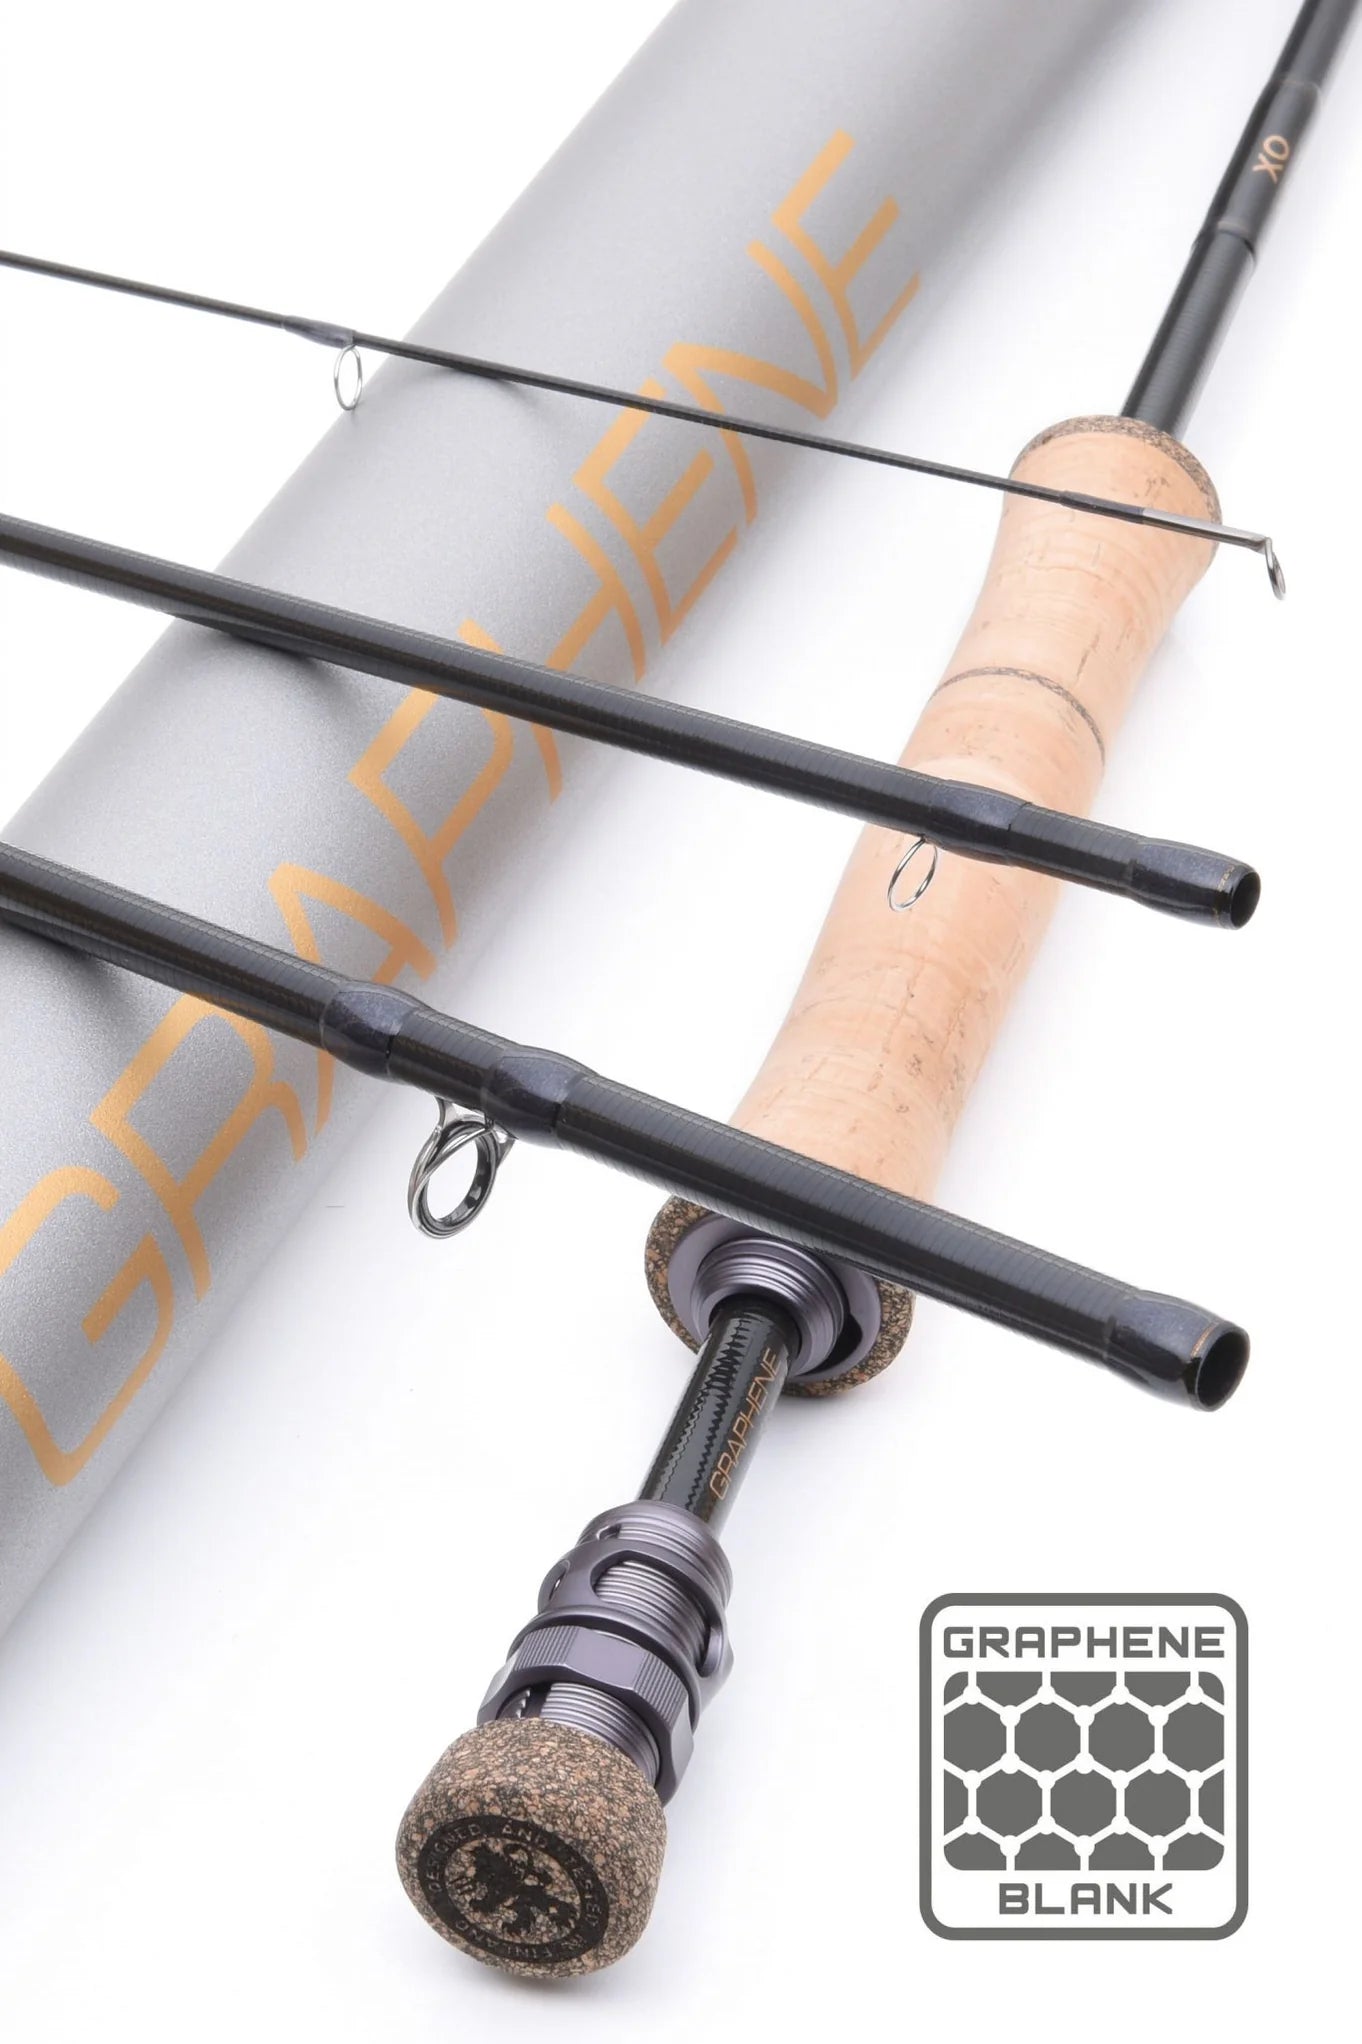 Recommended Top End Fly Rods